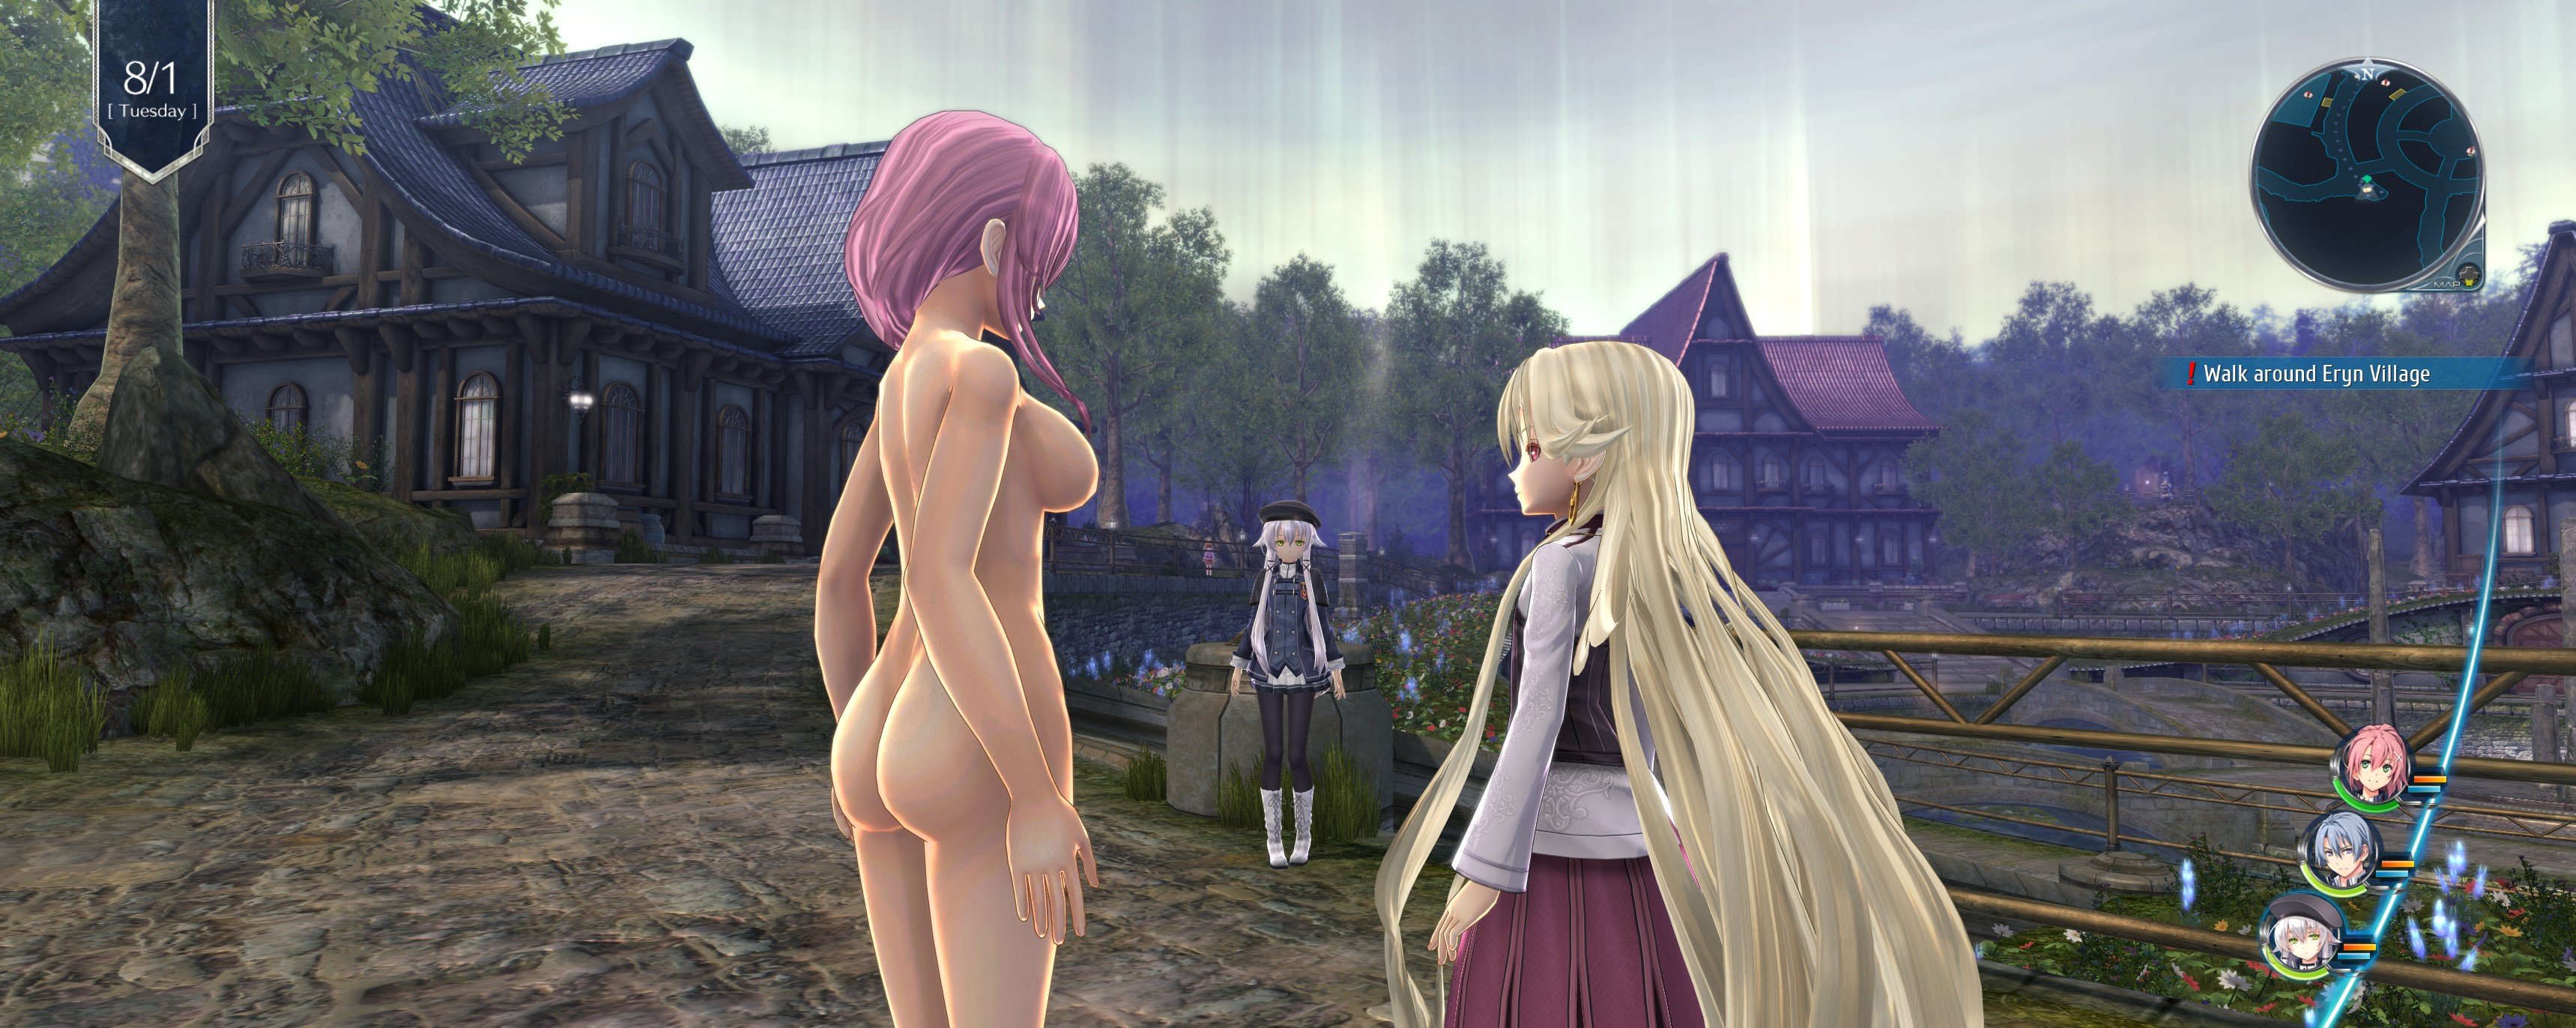 Trails Of Cold Steel 4 Mod Request Adult Gaming Loverslab